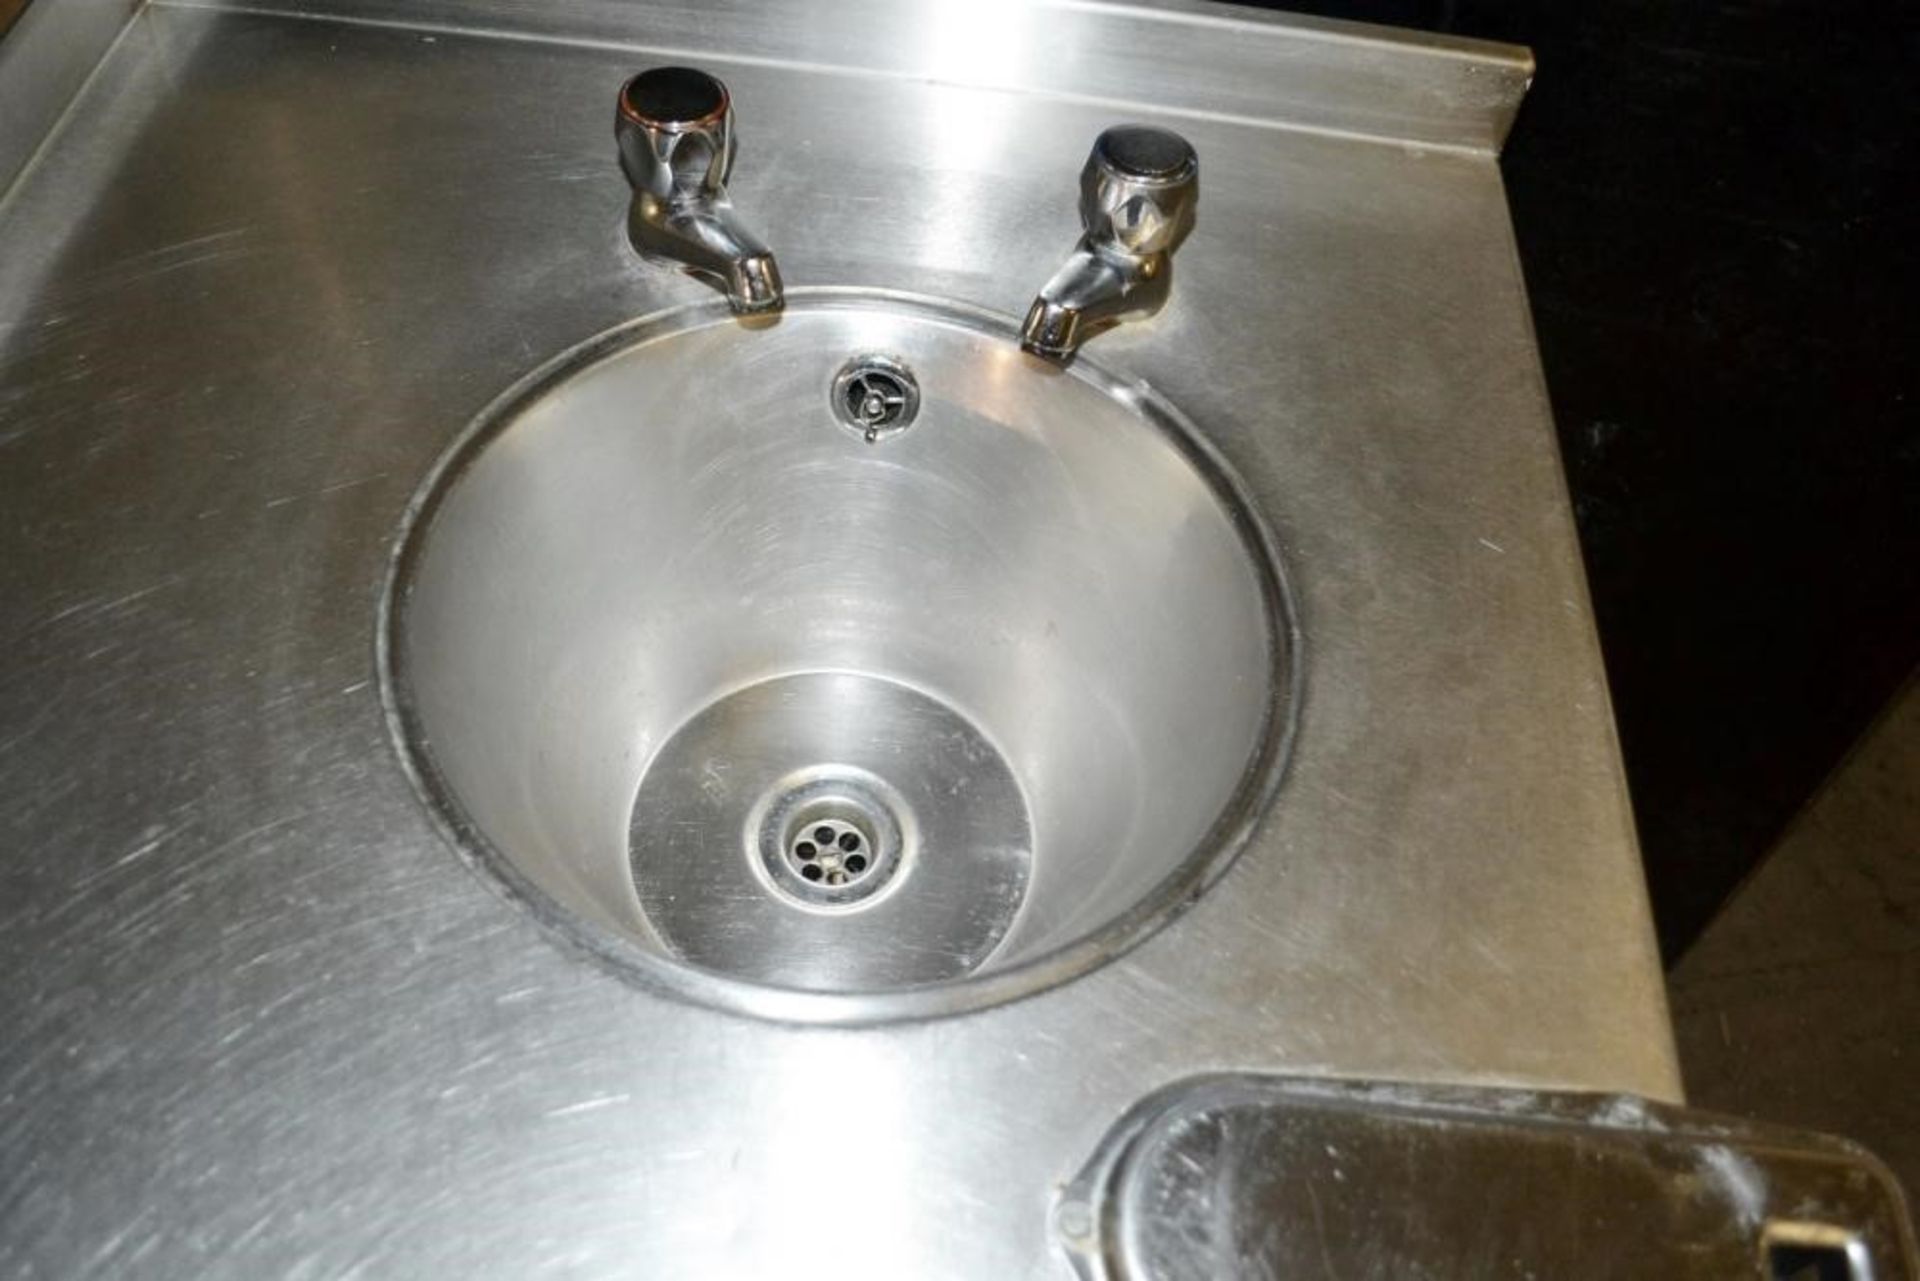 1 x Commercial Stainless Steel Double Sink Unit With Mixer Tap, Spillage Lip, Splashback and Undersh - Image 4 of 6